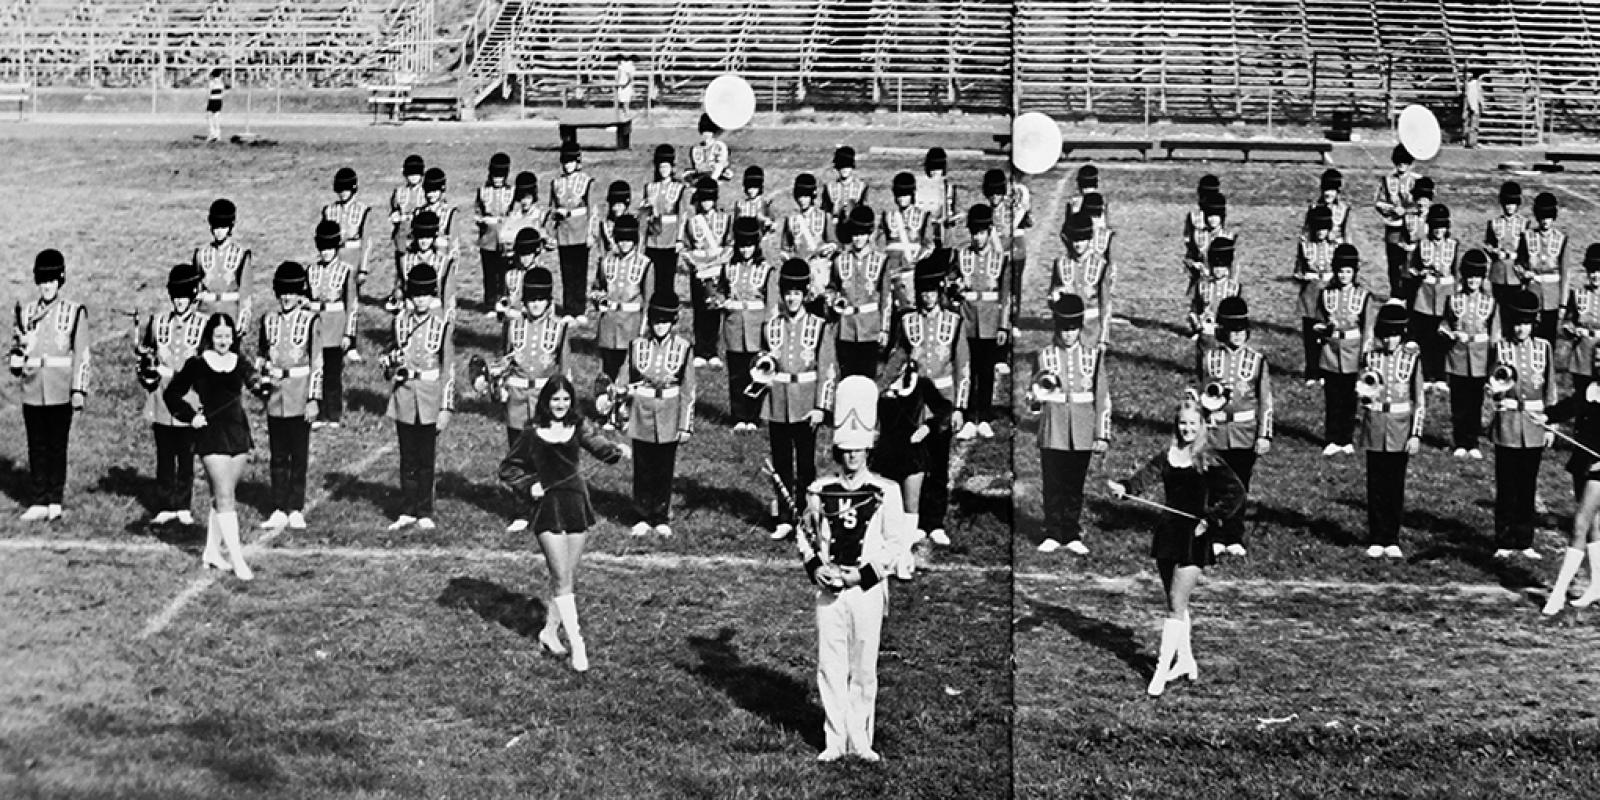 WSHS 1970s - Extracurricular Activities